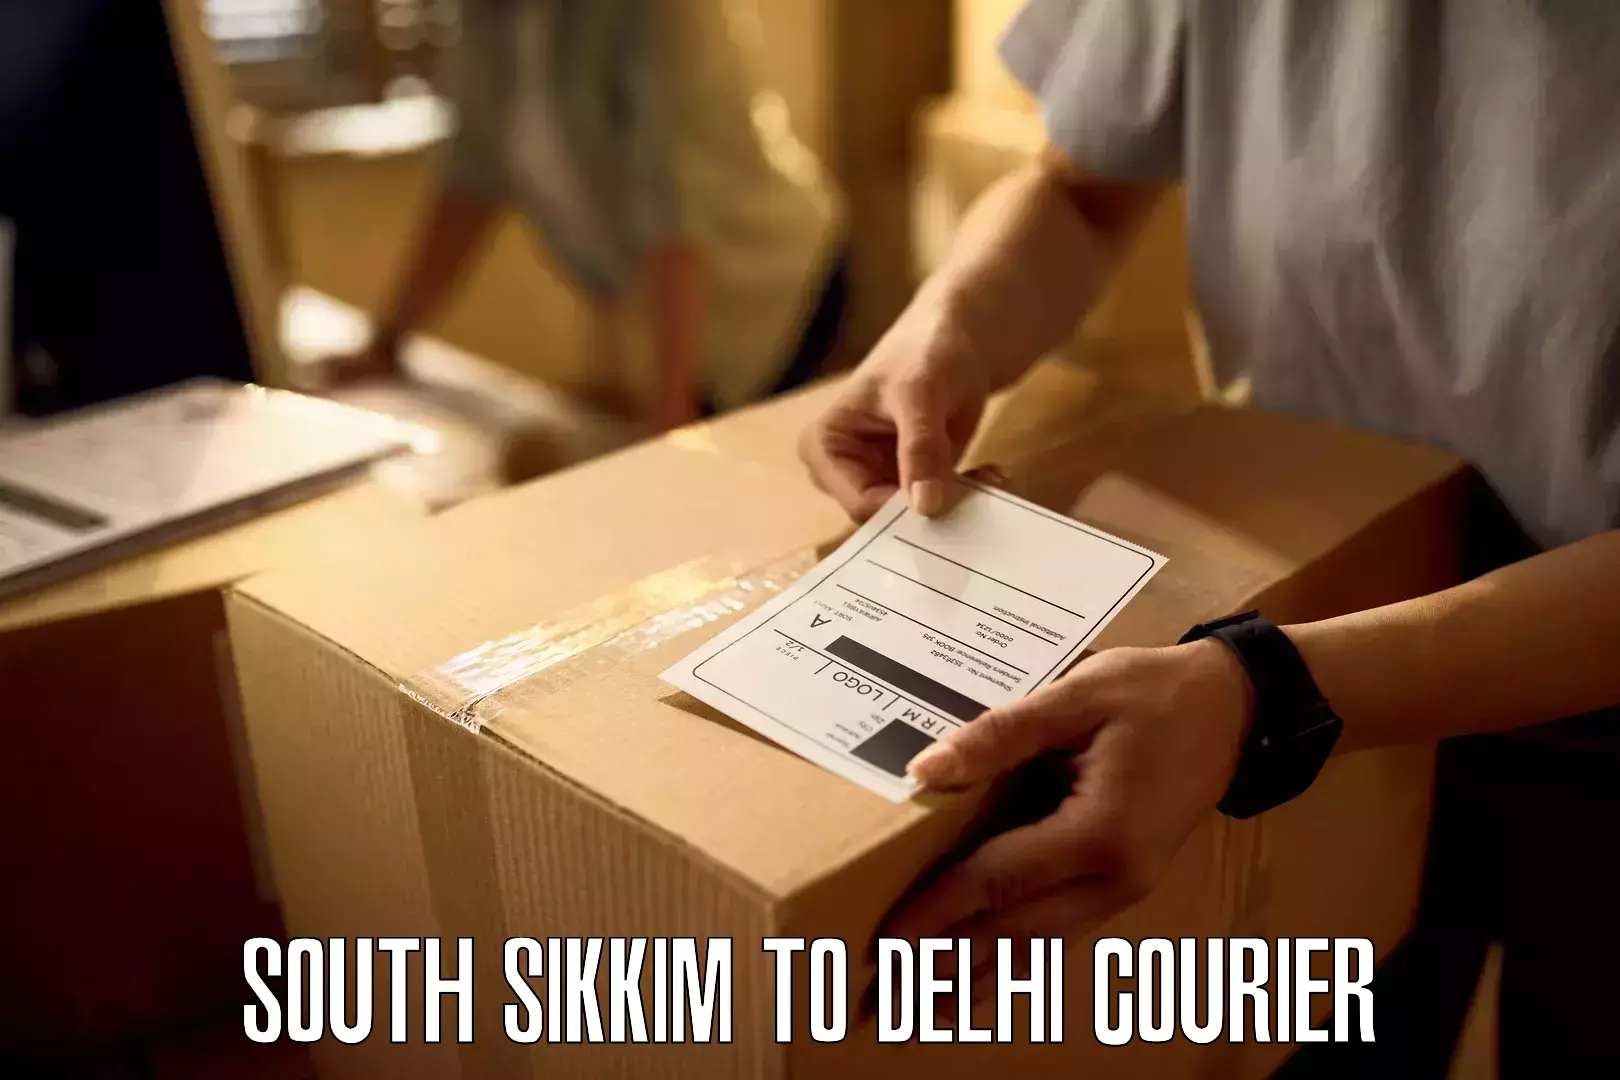 Full-service courier options South Sikkim to NCR